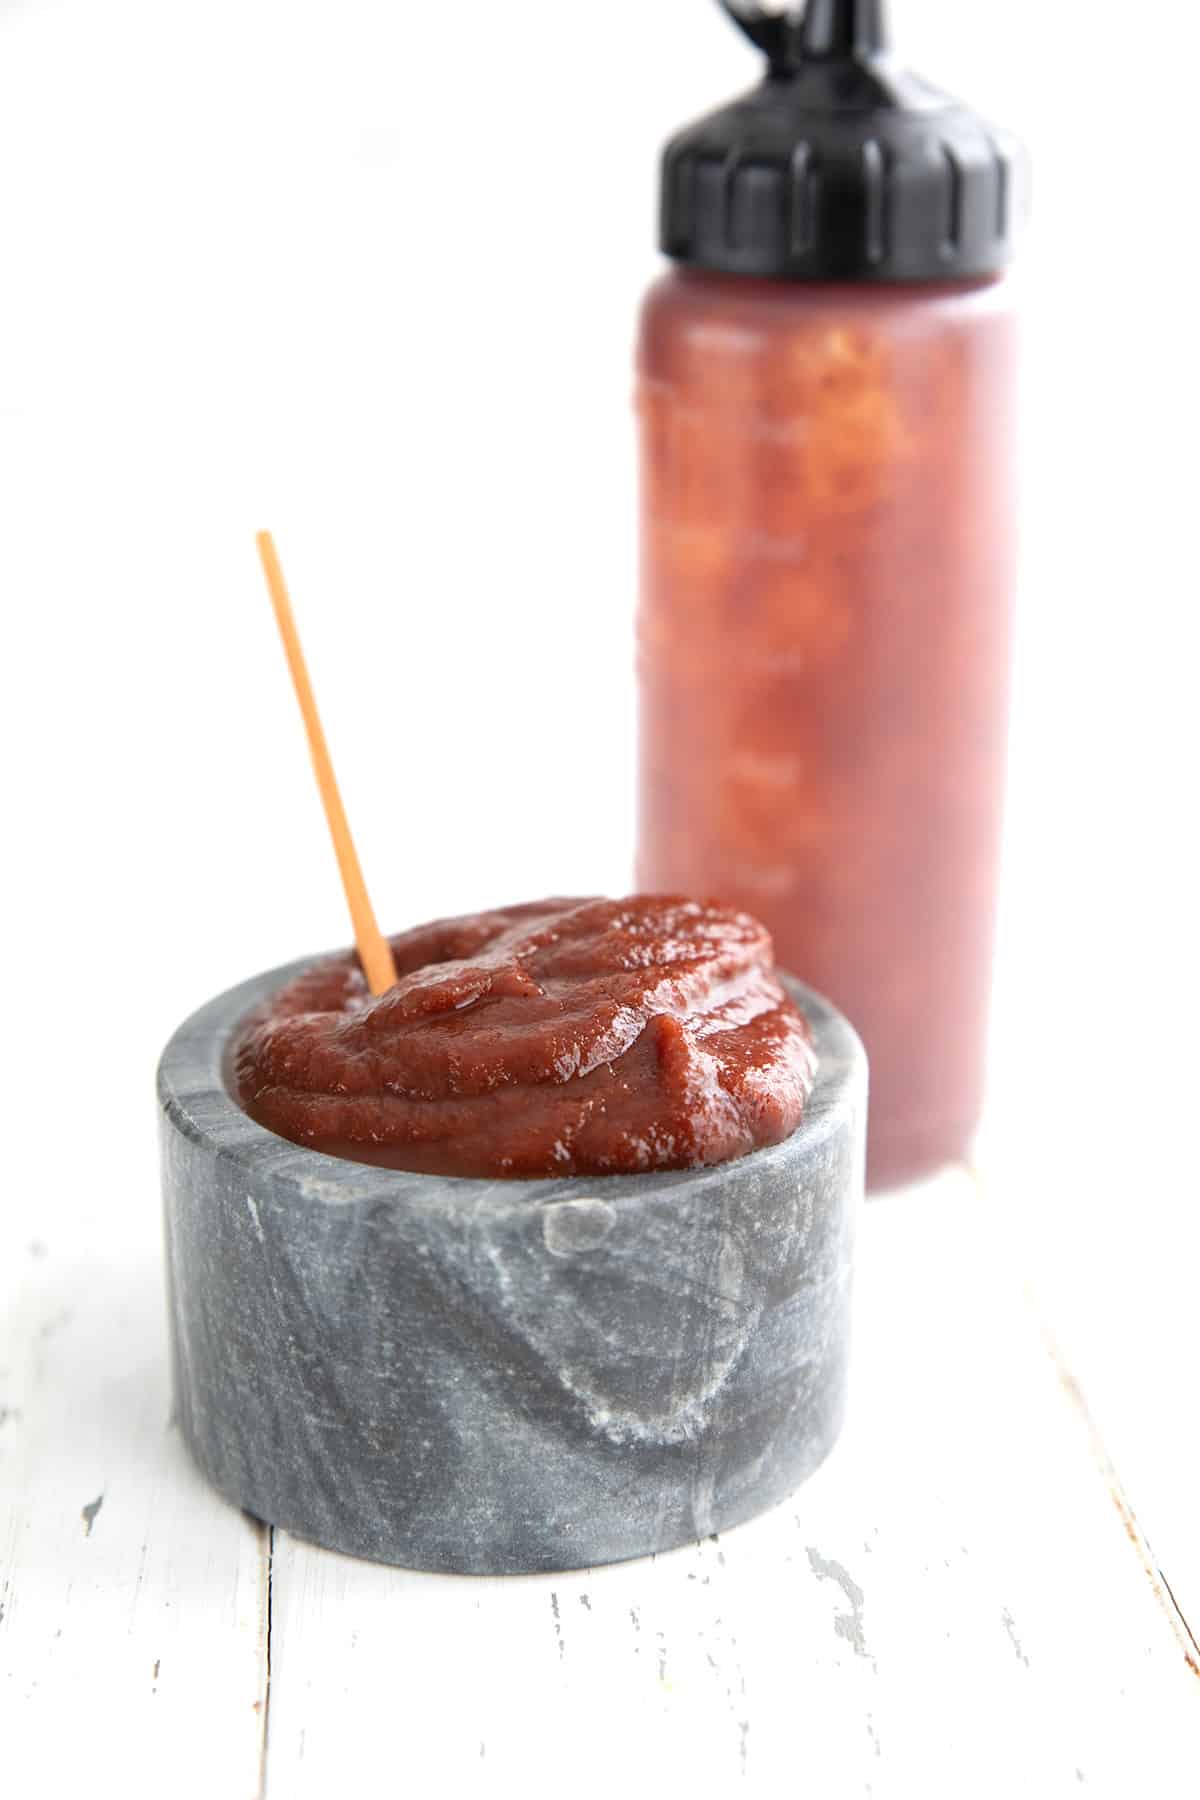 A bowl of keto ketchup in front of a squeeze bottle of more ketchup.